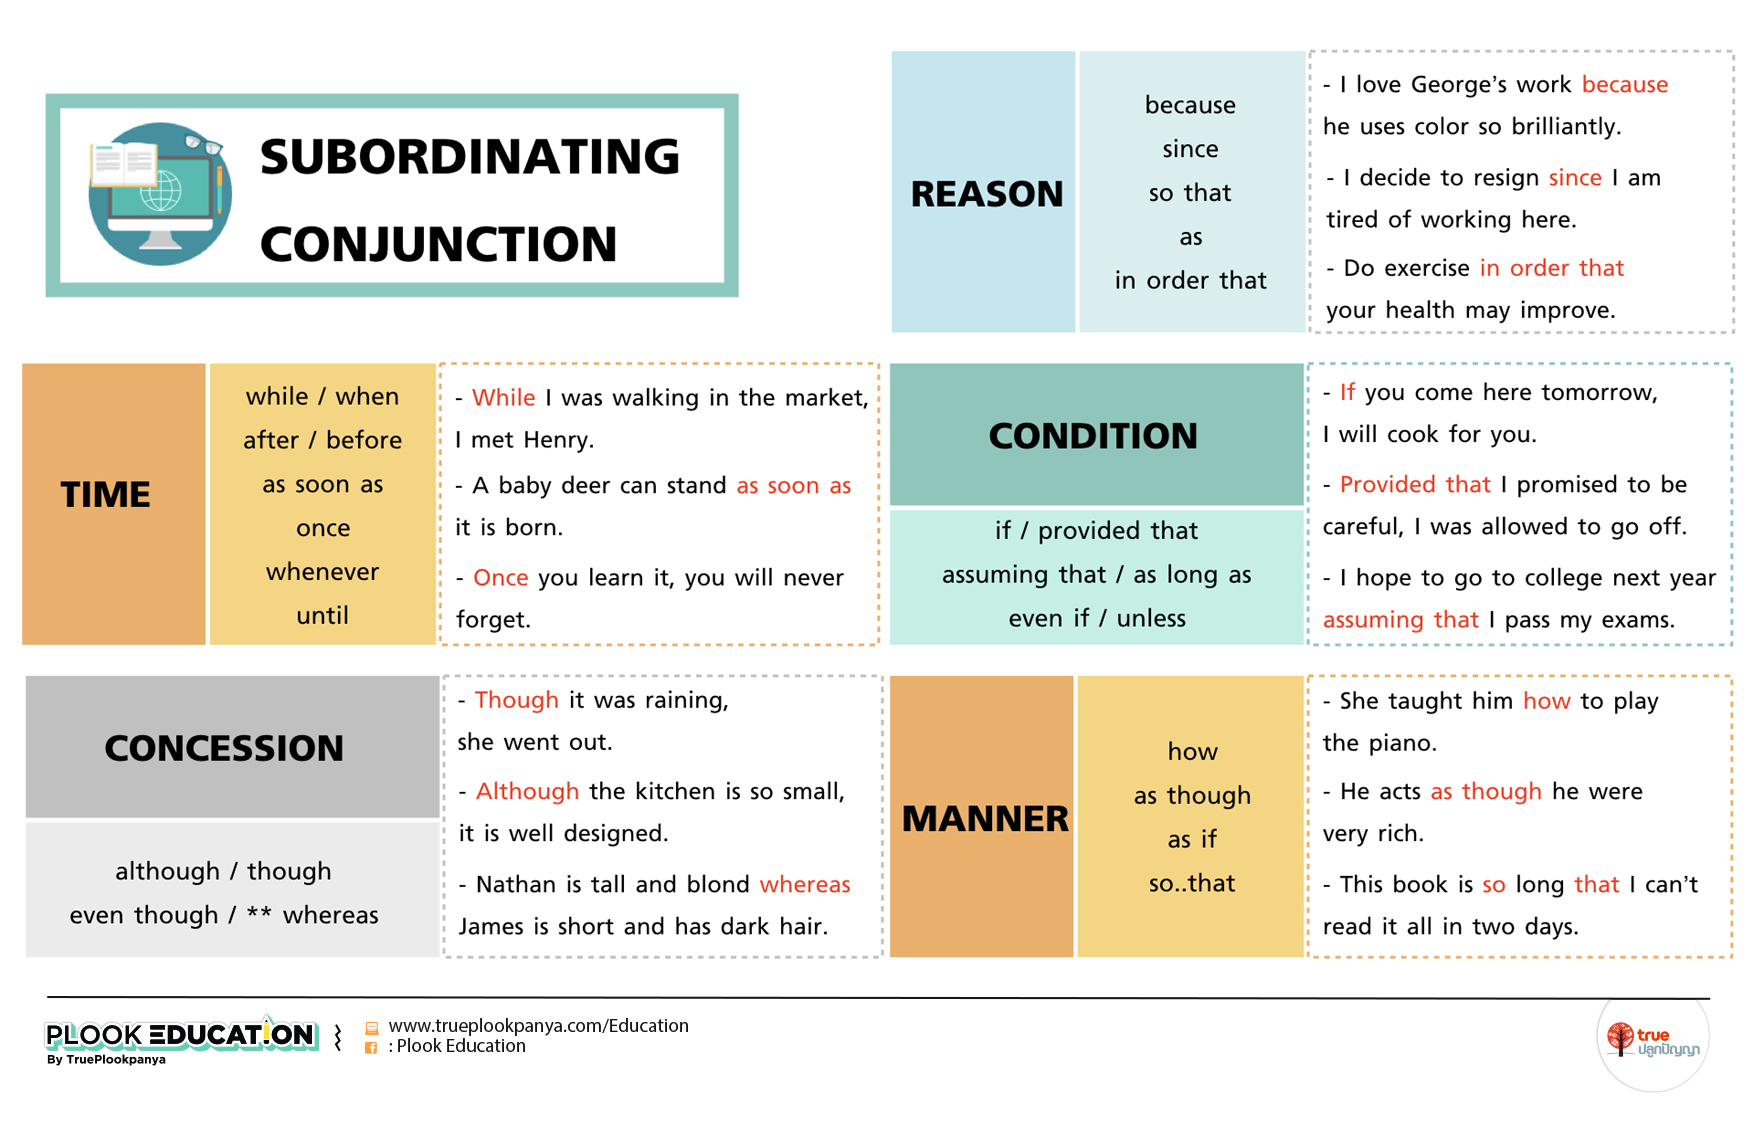 Subordinating conjunctions. Coordinating and Subordinating conjunctions. While conjunction. Conditional conjunctions.